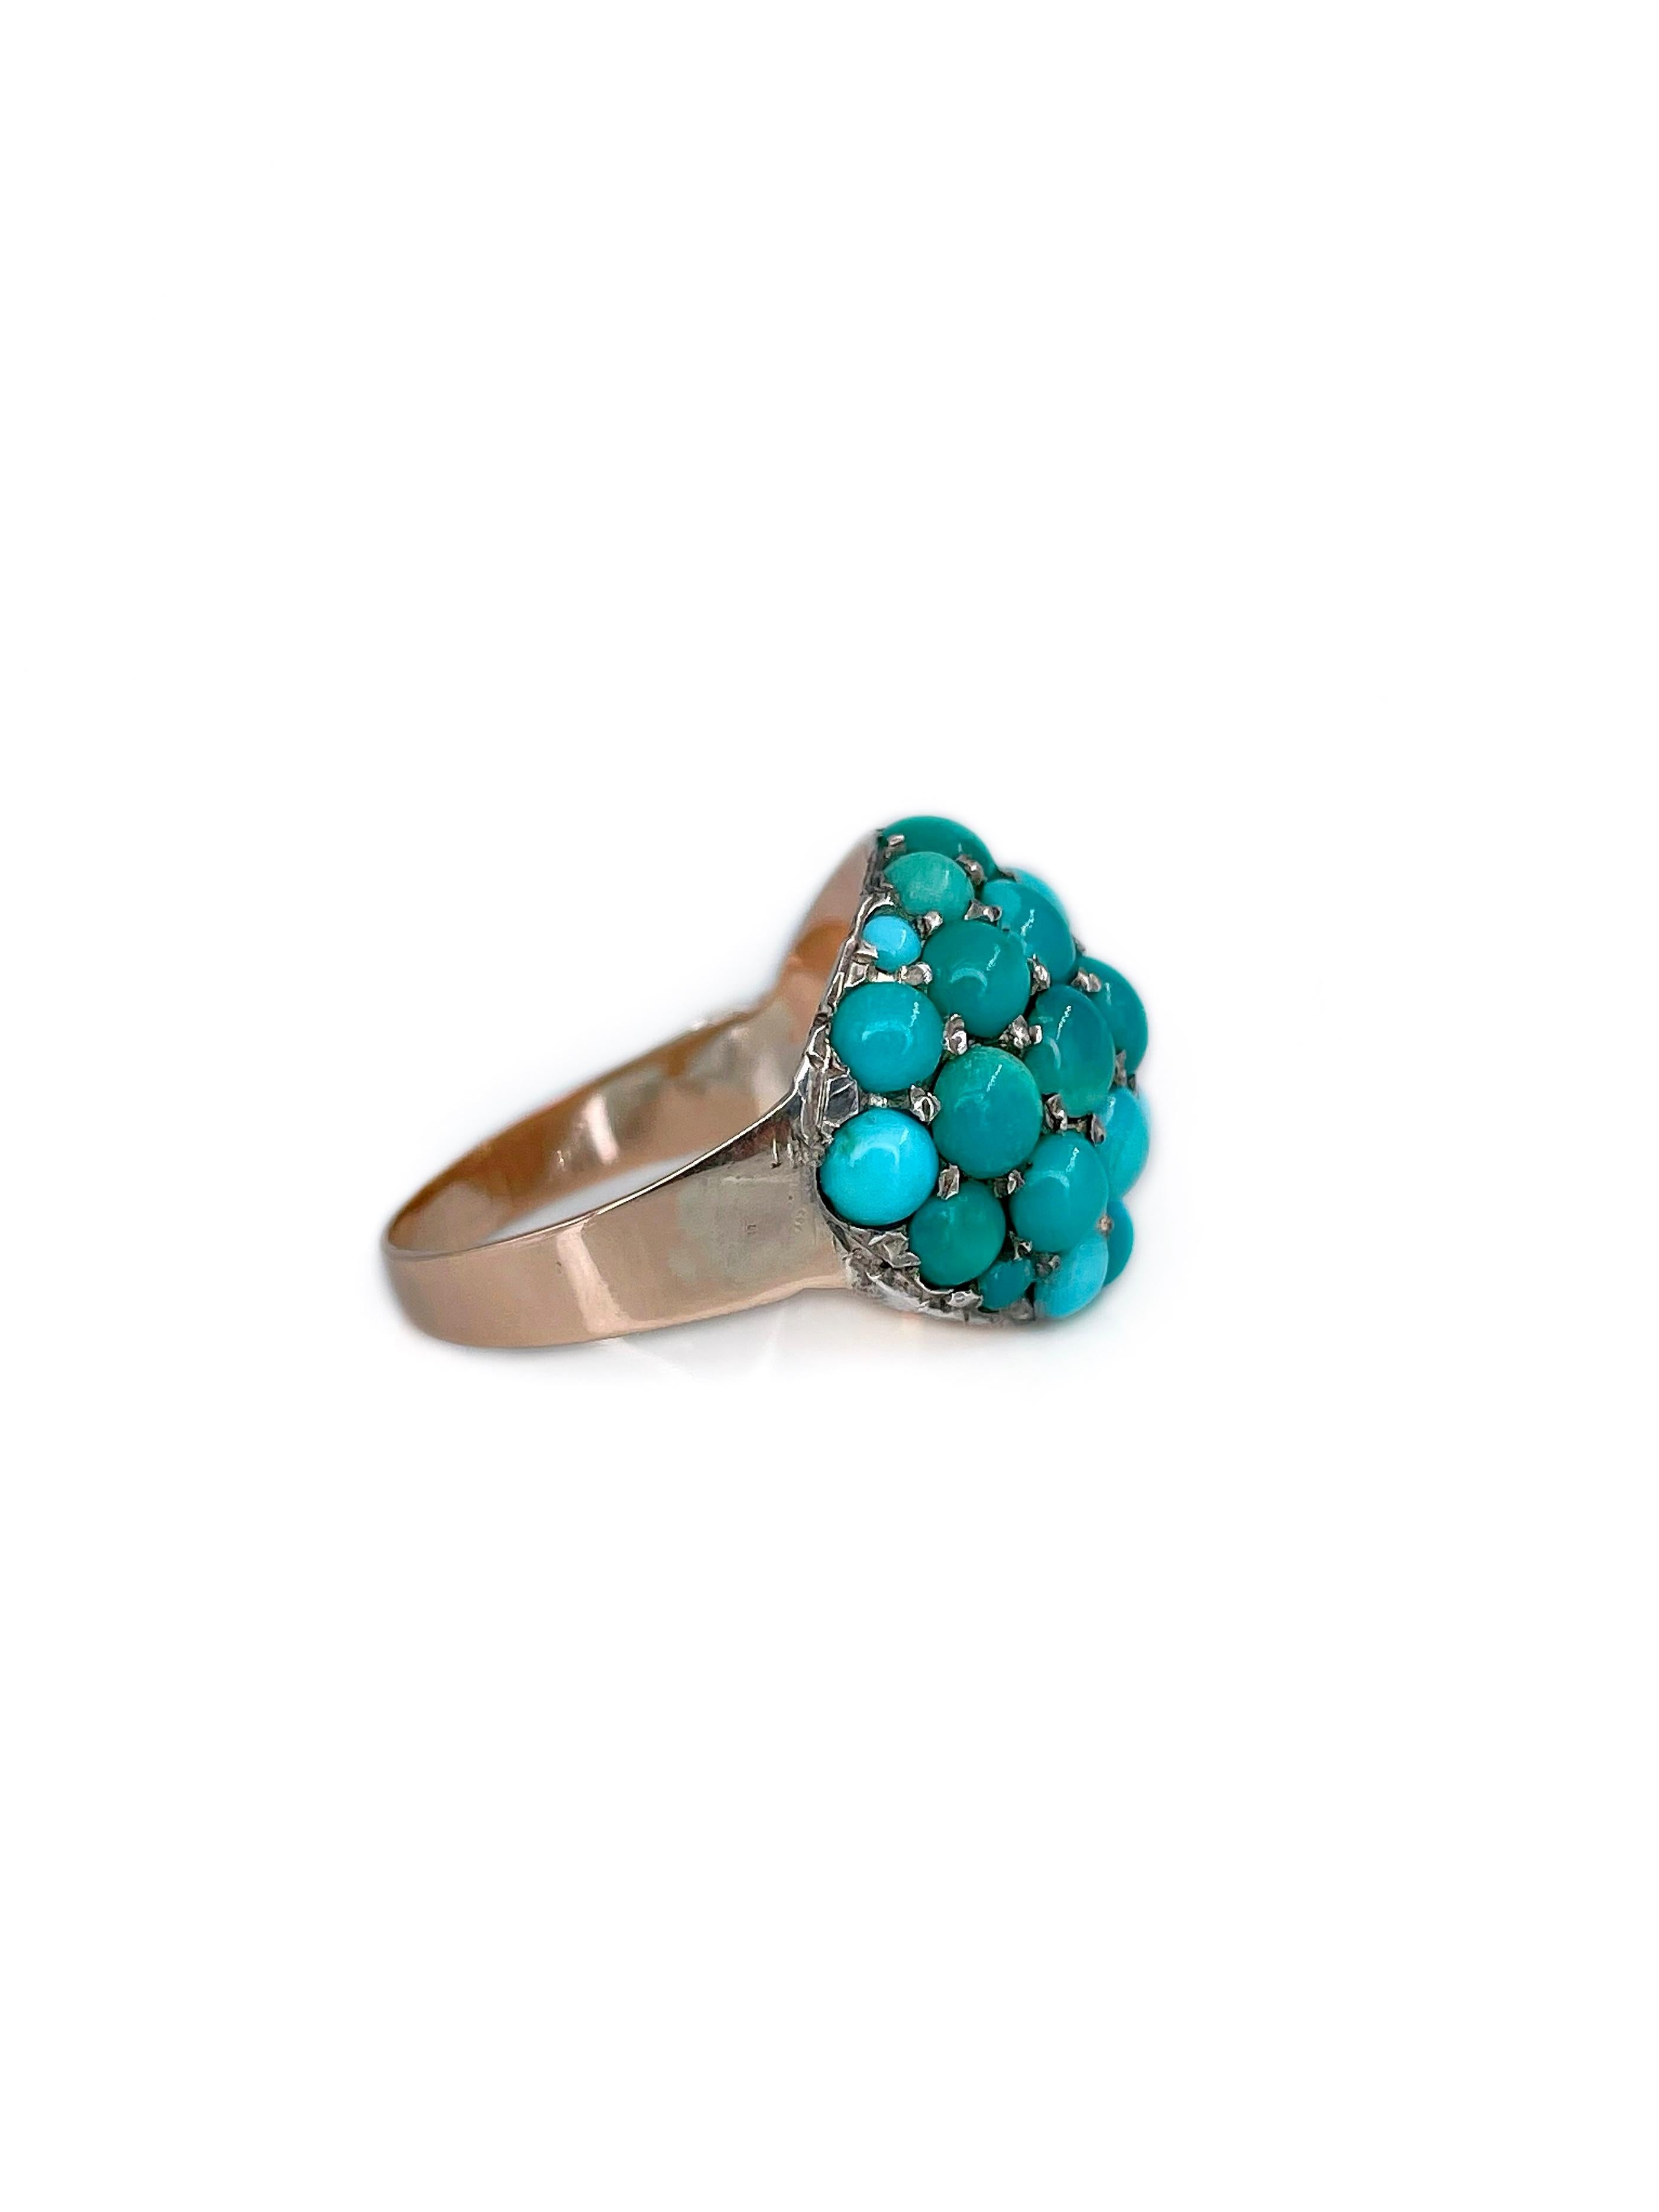 Victorian 14 Karat Gold Pavé Set Turquoise Dome Ring In Good Condition For Sale In Vilnius, LT